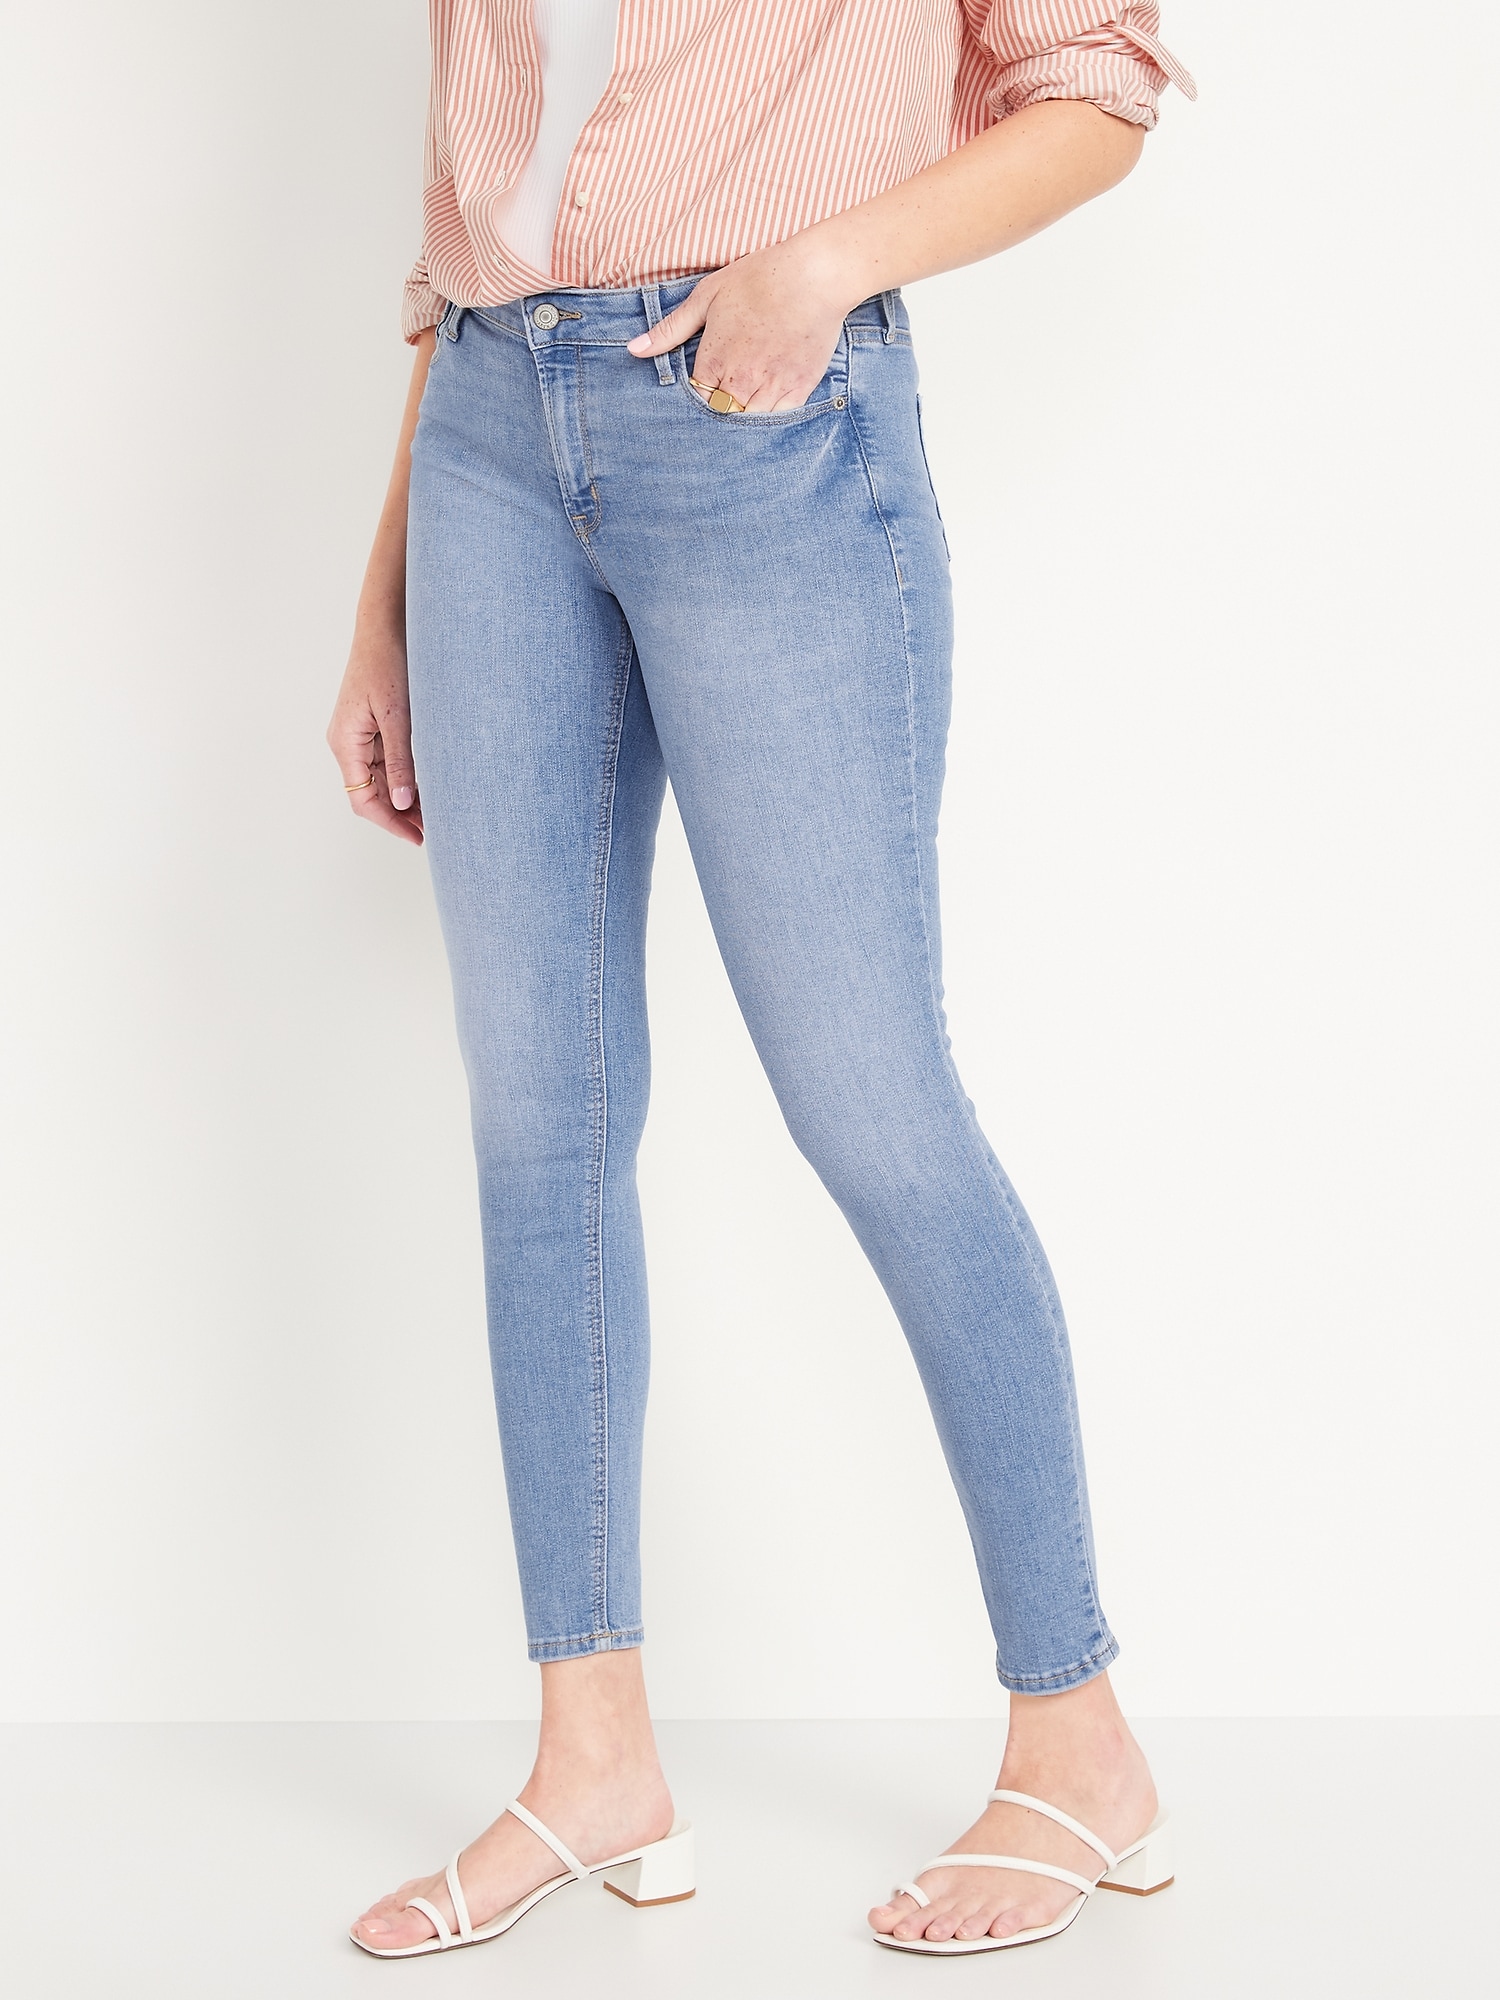 Mid-Rise Rockstar Super Skinny Jeans for Women | Old Navy